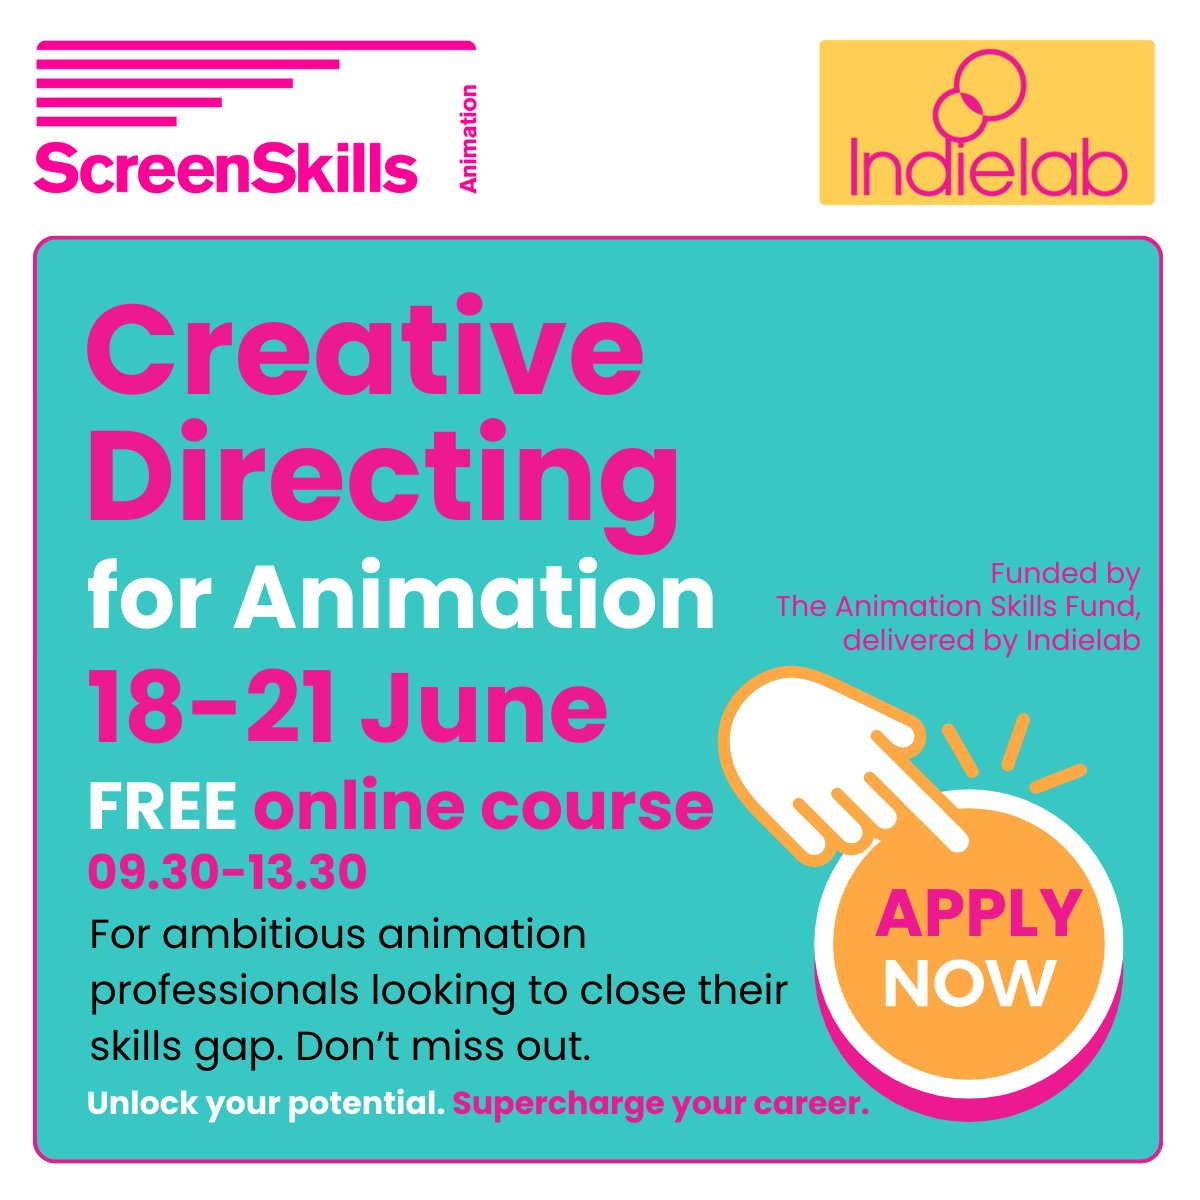 Ready to elevate your animation game? This @ScreenSkills course is your ticket to mastering creative directing in animation! Dive deep into the role of a Director, uncovering every aspect of the creative process from pre-production to post-production screenskills.com/bookings/creat…